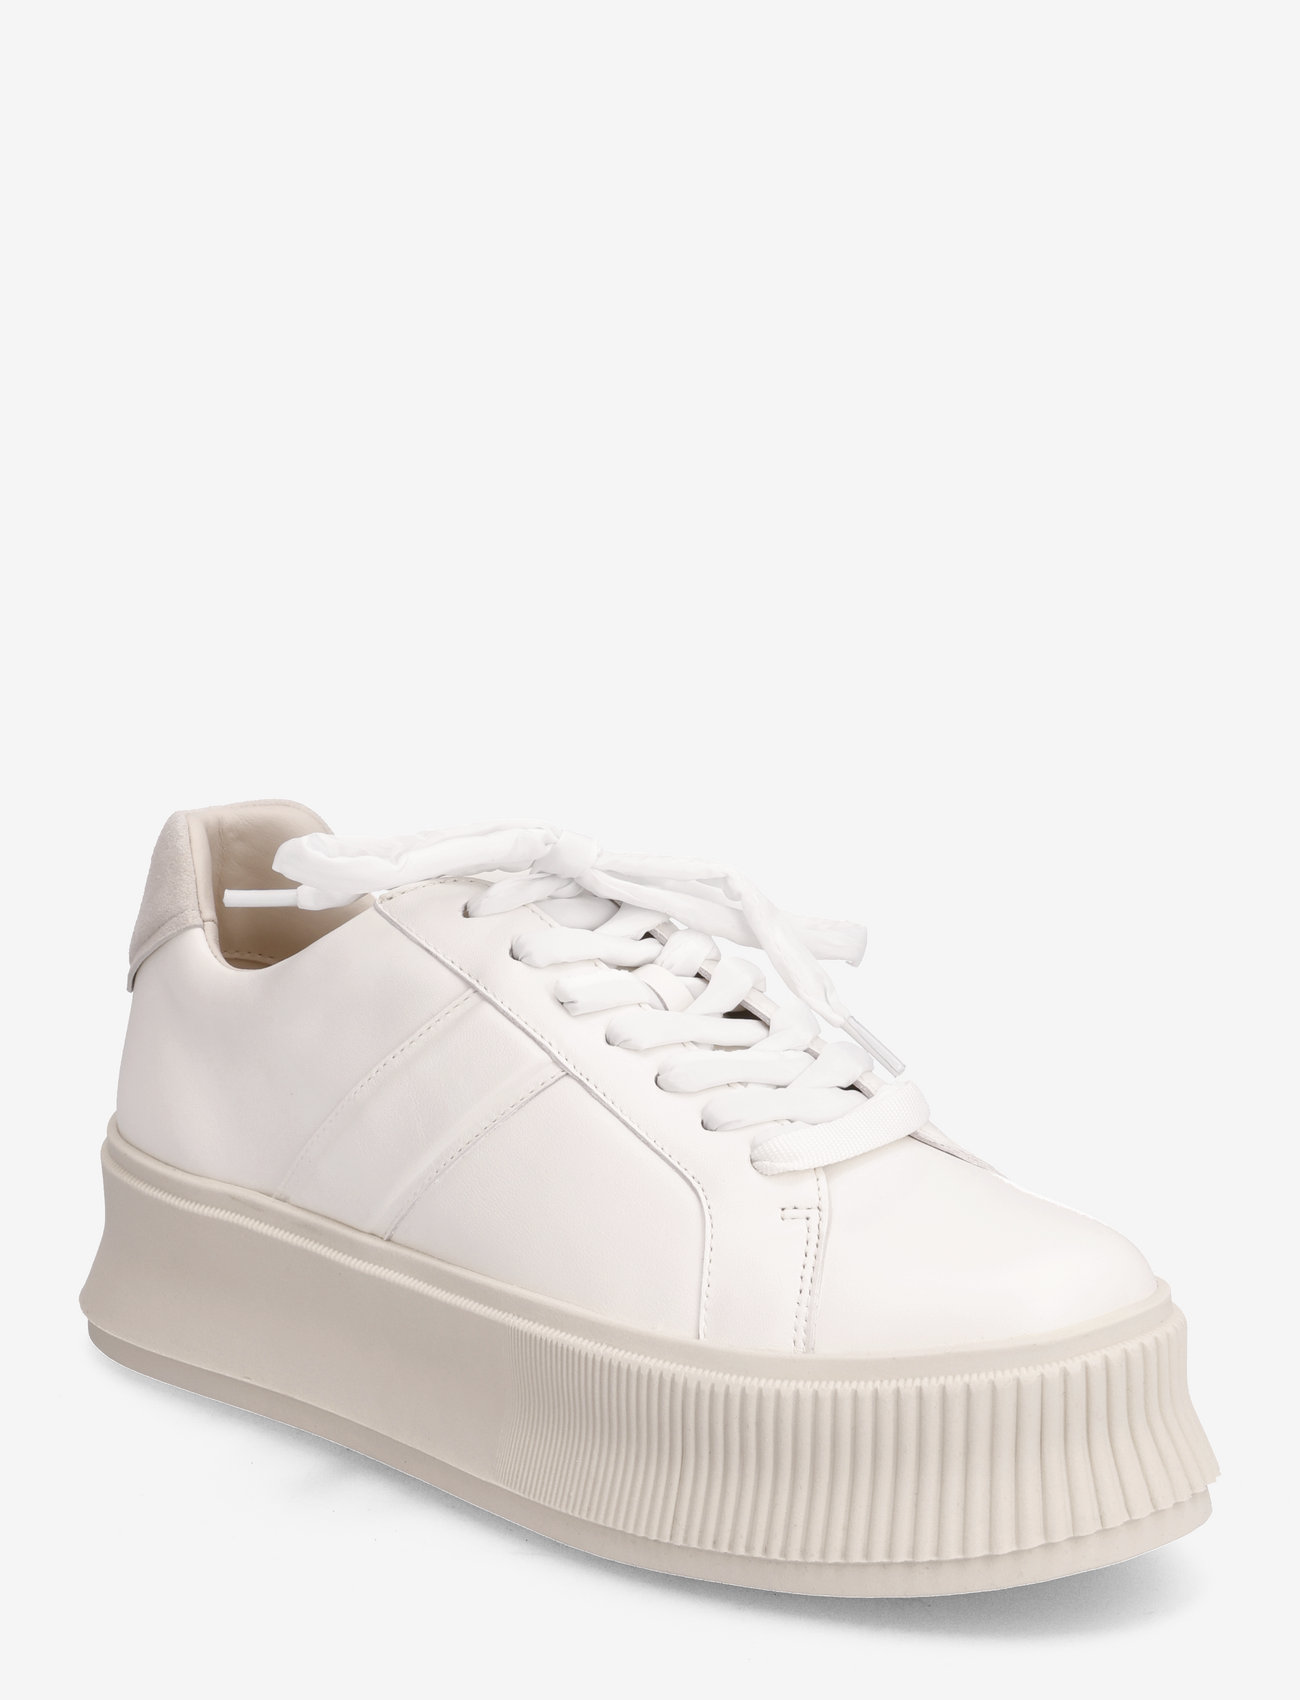 NEWD.Tamaris - Woms Lace-up - lave sneakers - white/cream - 0